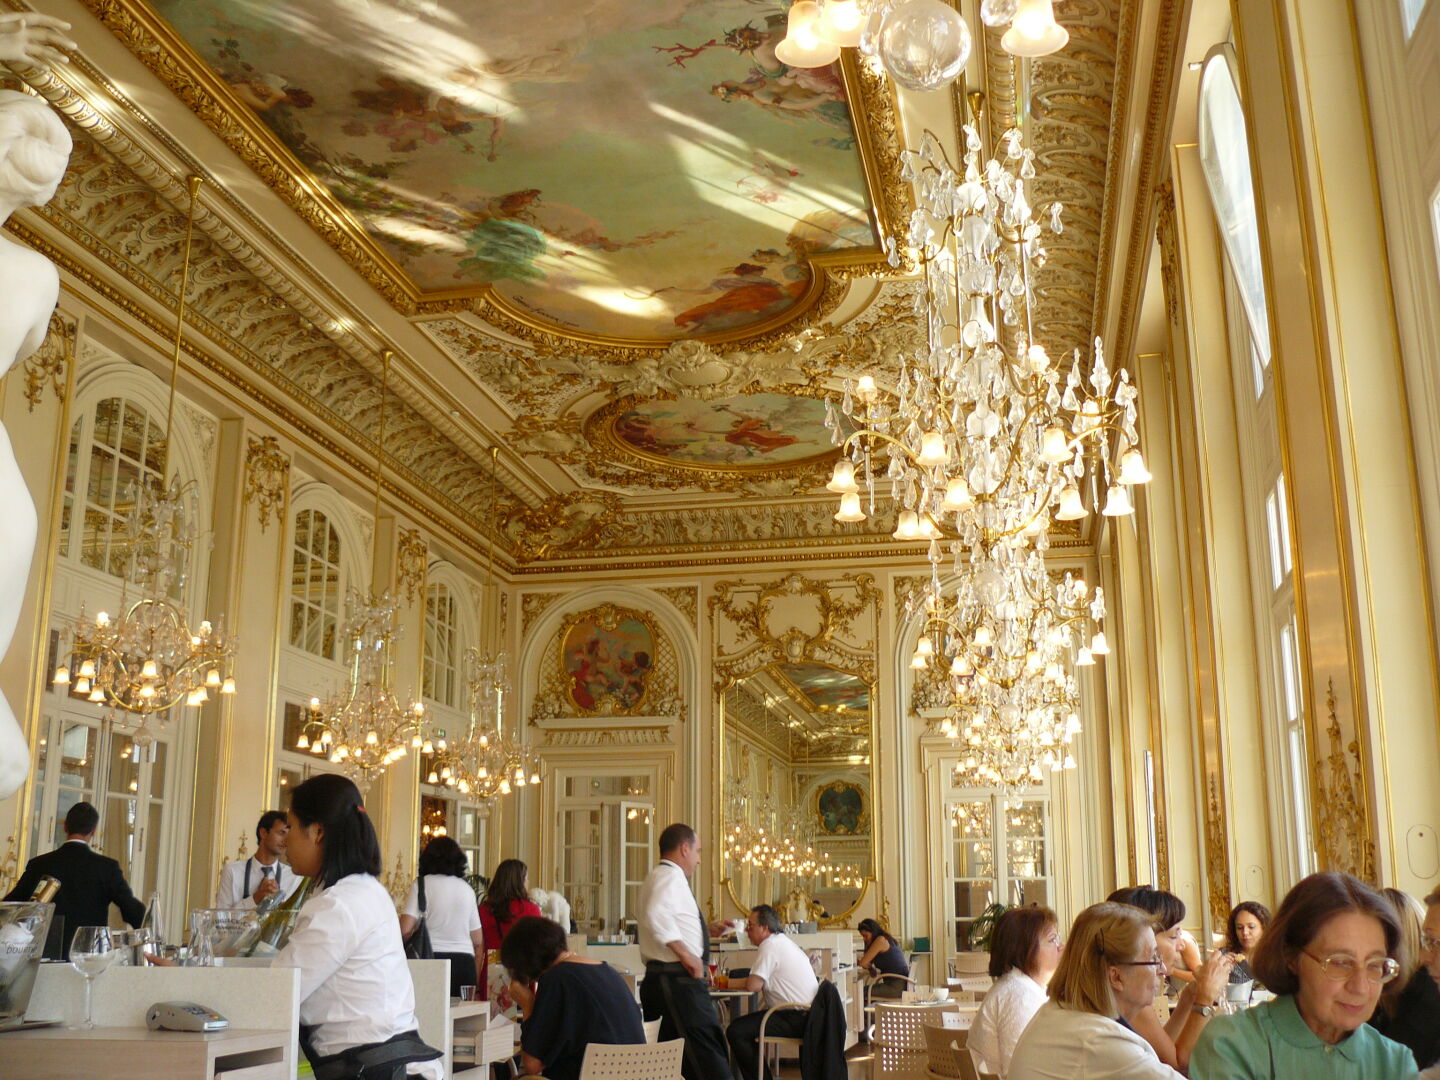 Enjoying &quot;The de Lord&quot; (Earl Grey) in the Café in the Musée d&rsquo;Orsay.